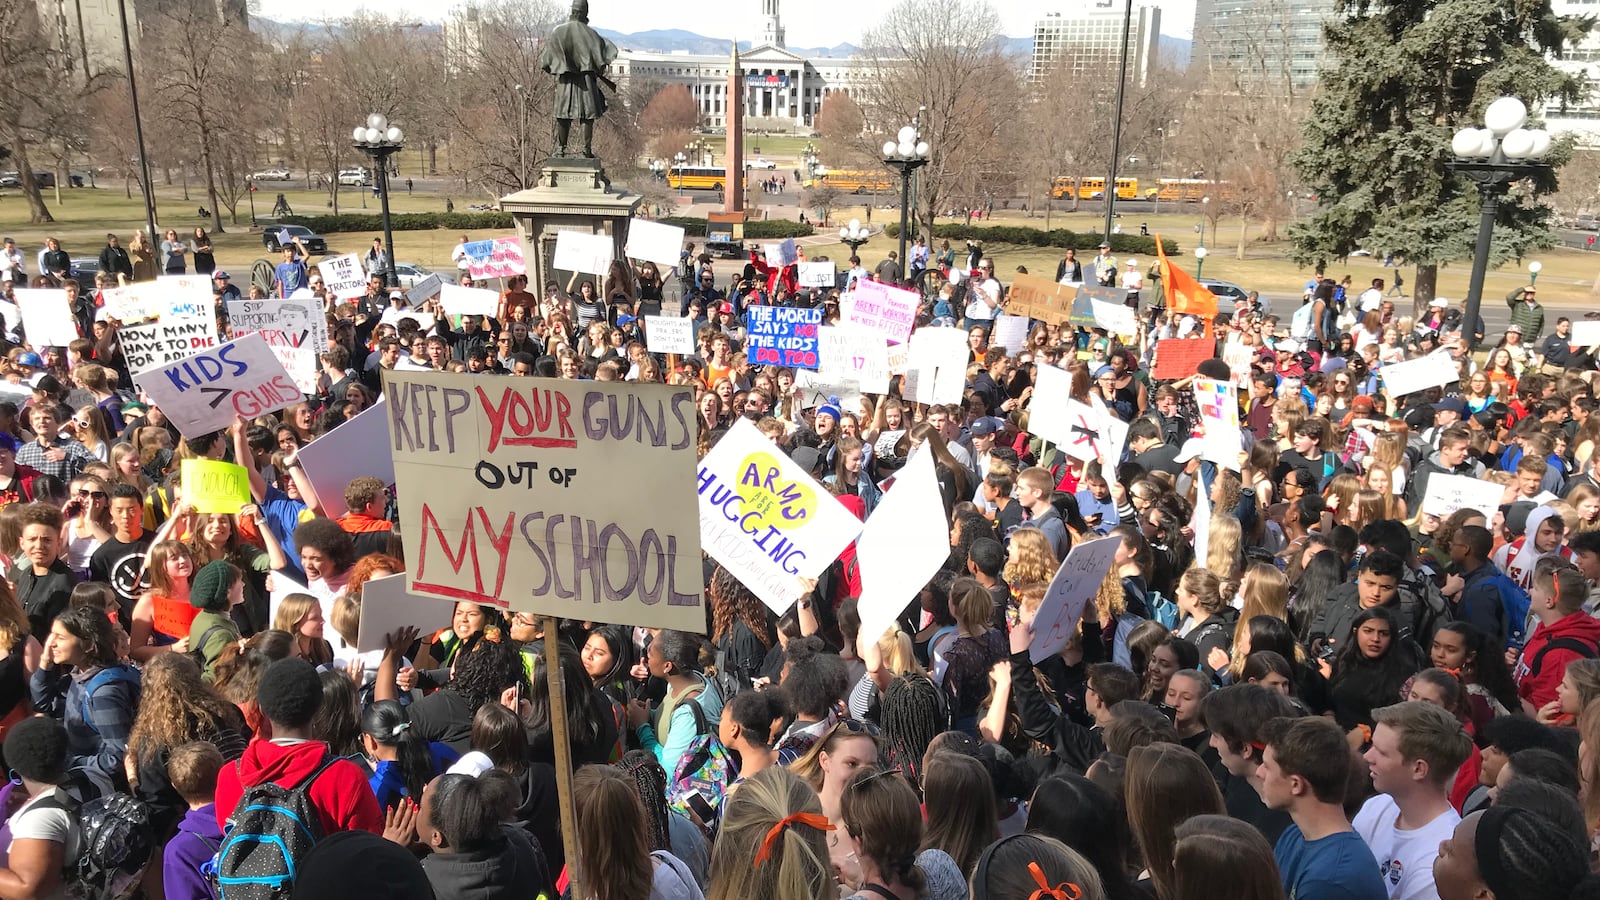 Students gather at the Colorado State Capitol to protest gun violence. (Melanie Asmar)